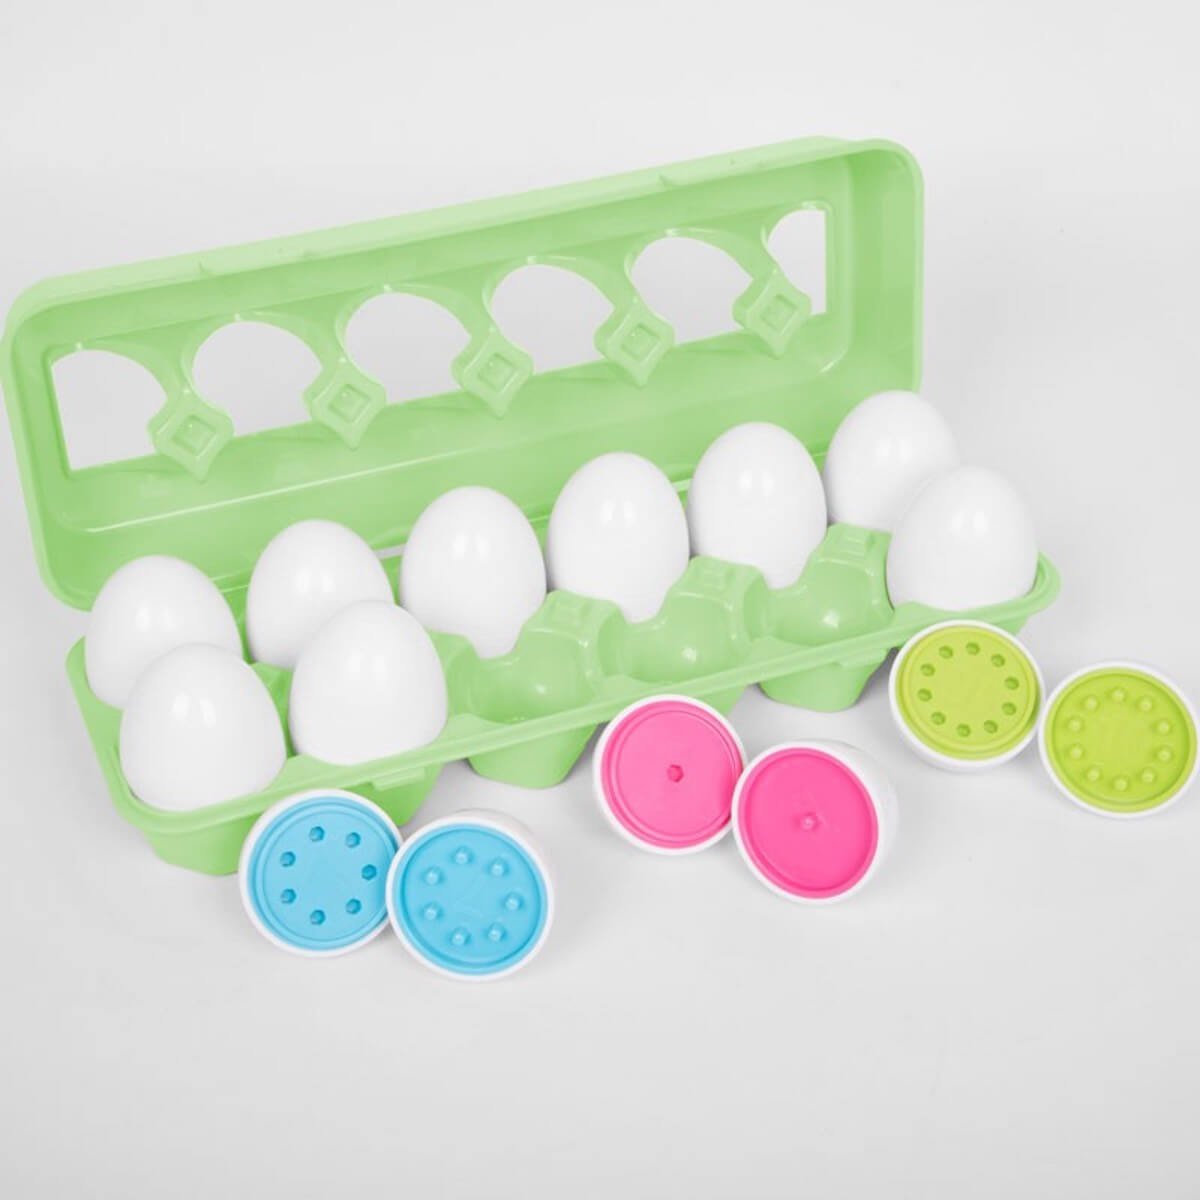 TickiT Multicolor 12 Eggs To Count